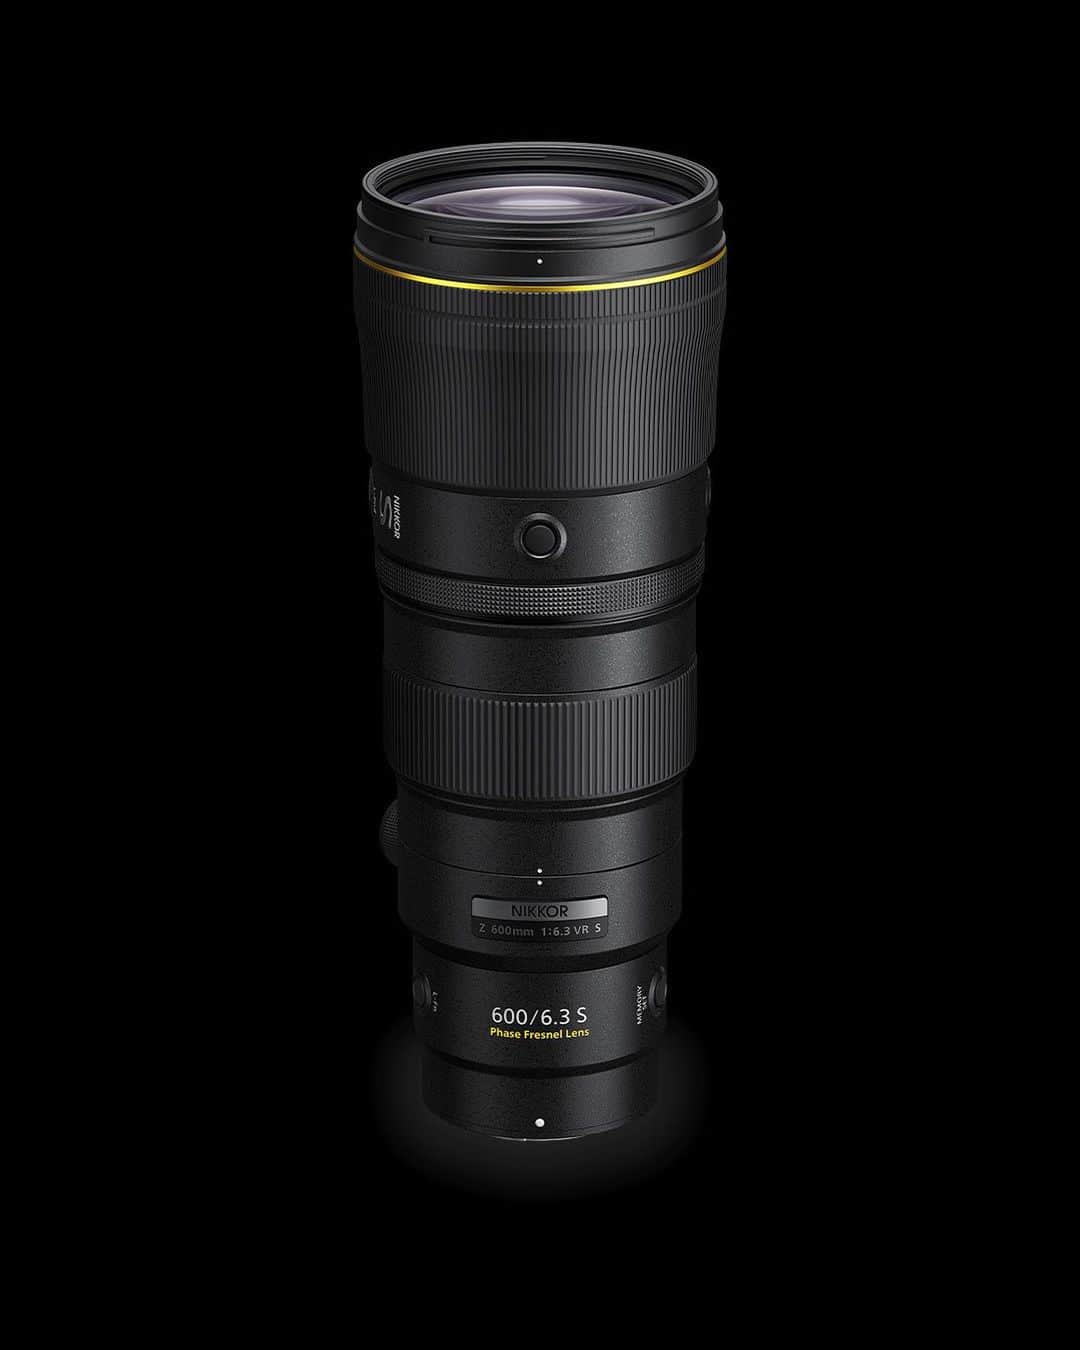 Nikon Australiaのインスタグラム：「Go the distance. Announcing the NIKKOR Z 600mm f/6.3 VR S.  The lightest and most compact 600mm NIKKOR S lens in its class, made possible with a Phase Fresnel lens element. Whether you’re shooting wildlife or sport, take control in any scene with superior VR performance and dust & drip resistance.  ·  Lightweight & Compact ·  Smooth & Responsive AF ·  PF Element reduces size and weight ·  Up to 6.0-stops of VR Performance with Z 8 and Z 9* ·  Dual VR Modes: Normal & Sport ·  Seamless Teleconverter Compatibility ·  Customisable L-Fn and Memory Recall Buttons ·  Dust & Drip Resistant  *Based on CIPA Standard; in NORMAL mode, when attached to a full frame/FX-format interchangeable-lens mirrorless camera  Learn more and secure your pre-order now at the link in our bio. 🔗☝️  #Nikon #NikonAustralia #MyNikonLife #NikonCreators #NIKKOR #600mm #600SuperTele #SuperTelephoto #Birds」